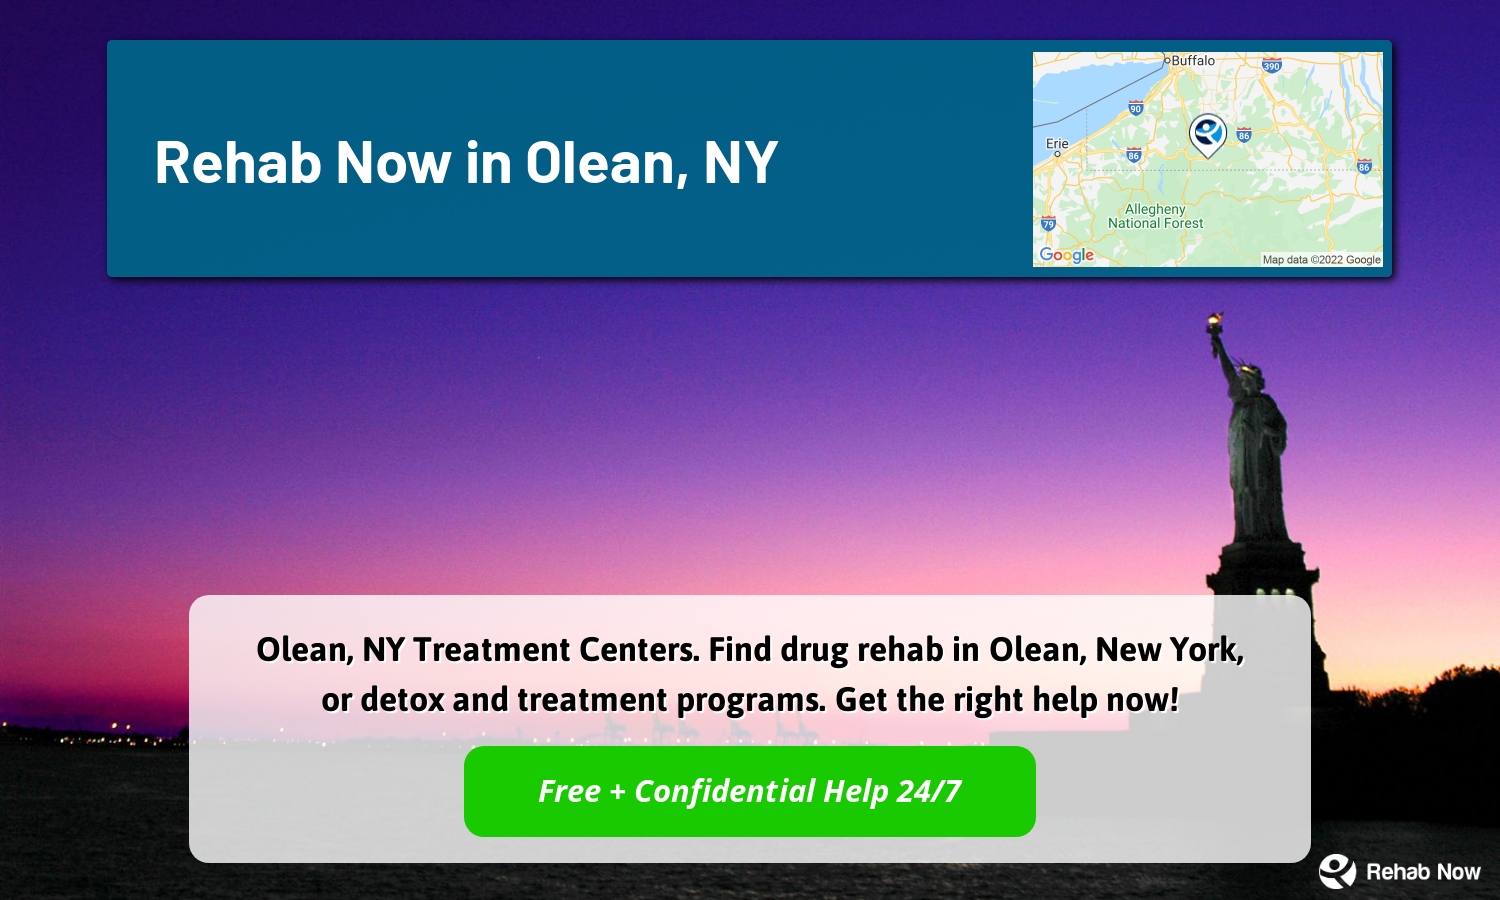 Olean, NY Treatment Centers. Find drug rehab in Olean, New York, or detox and treatment programs. Get the right help now!